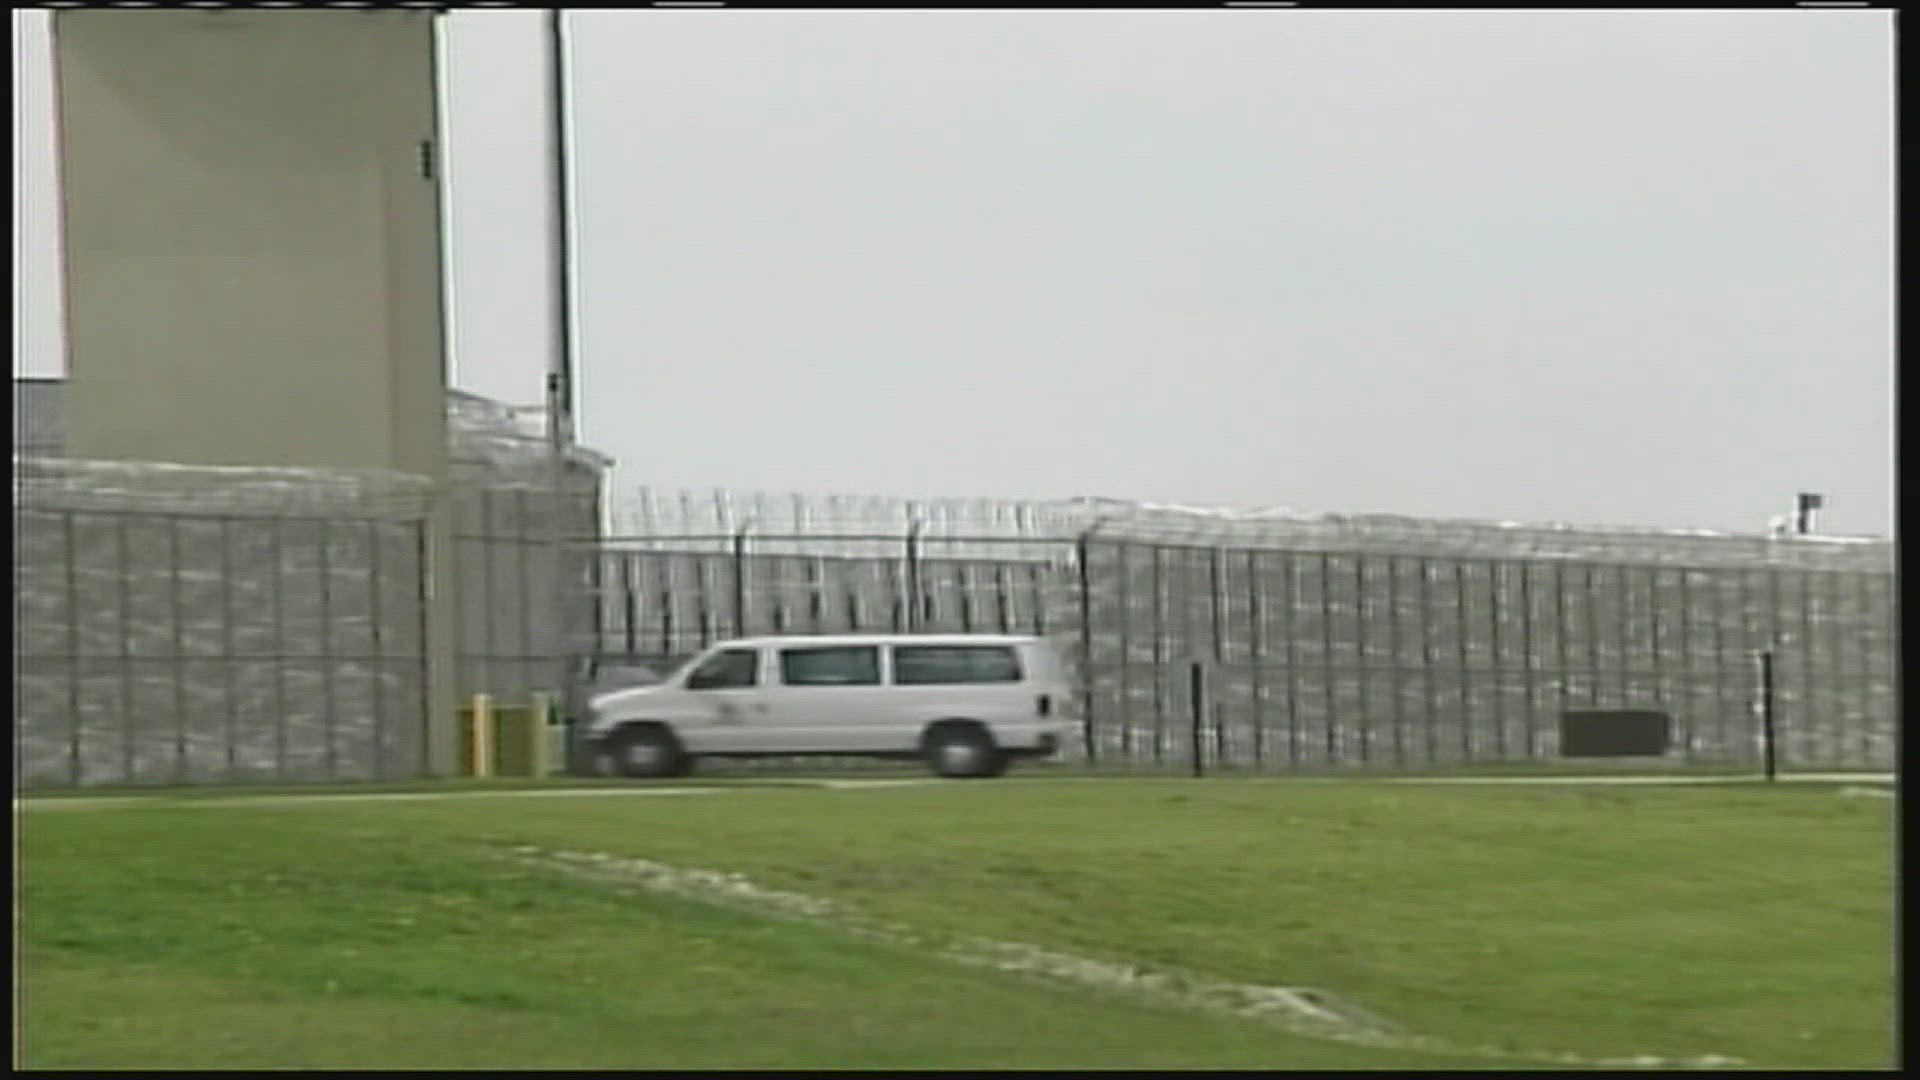 Prison authorities claim a firearm may have been brought inside.